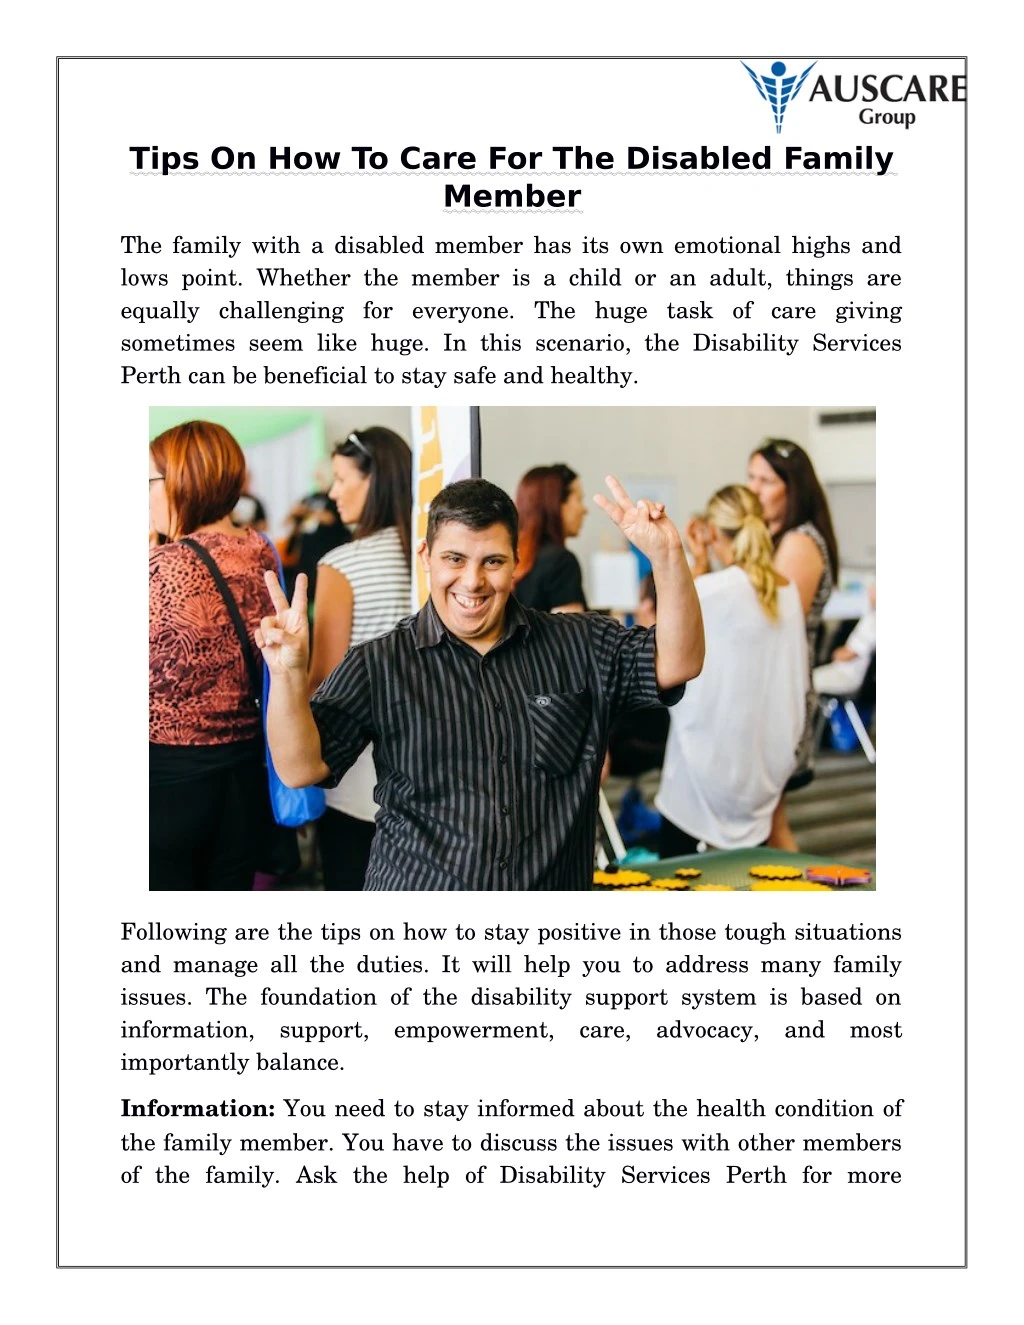 tips on how to care for the disabled family member